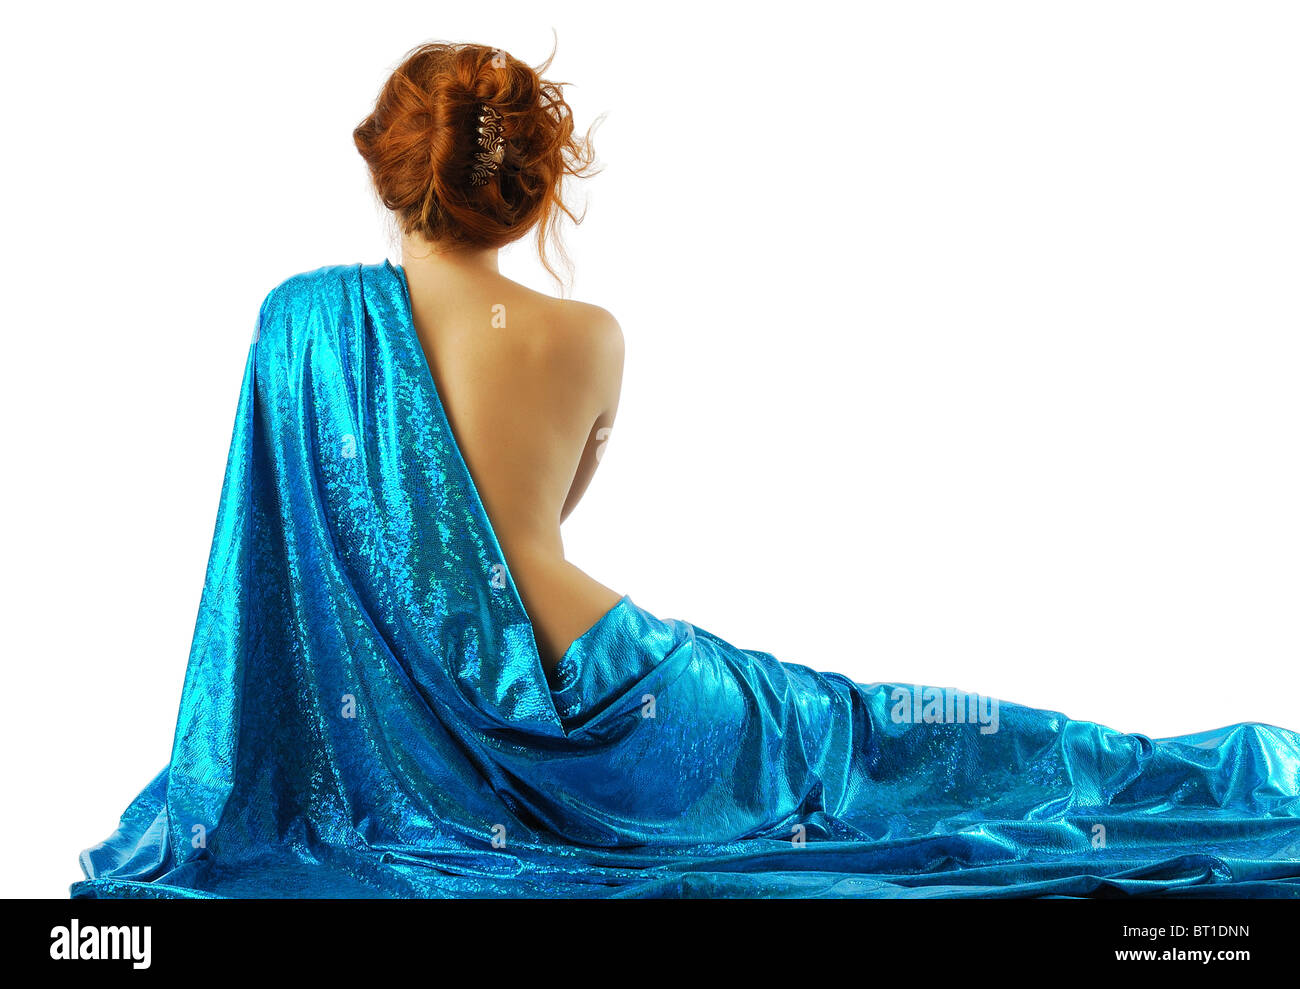 Woman covered with shiny blue material Stock Photo